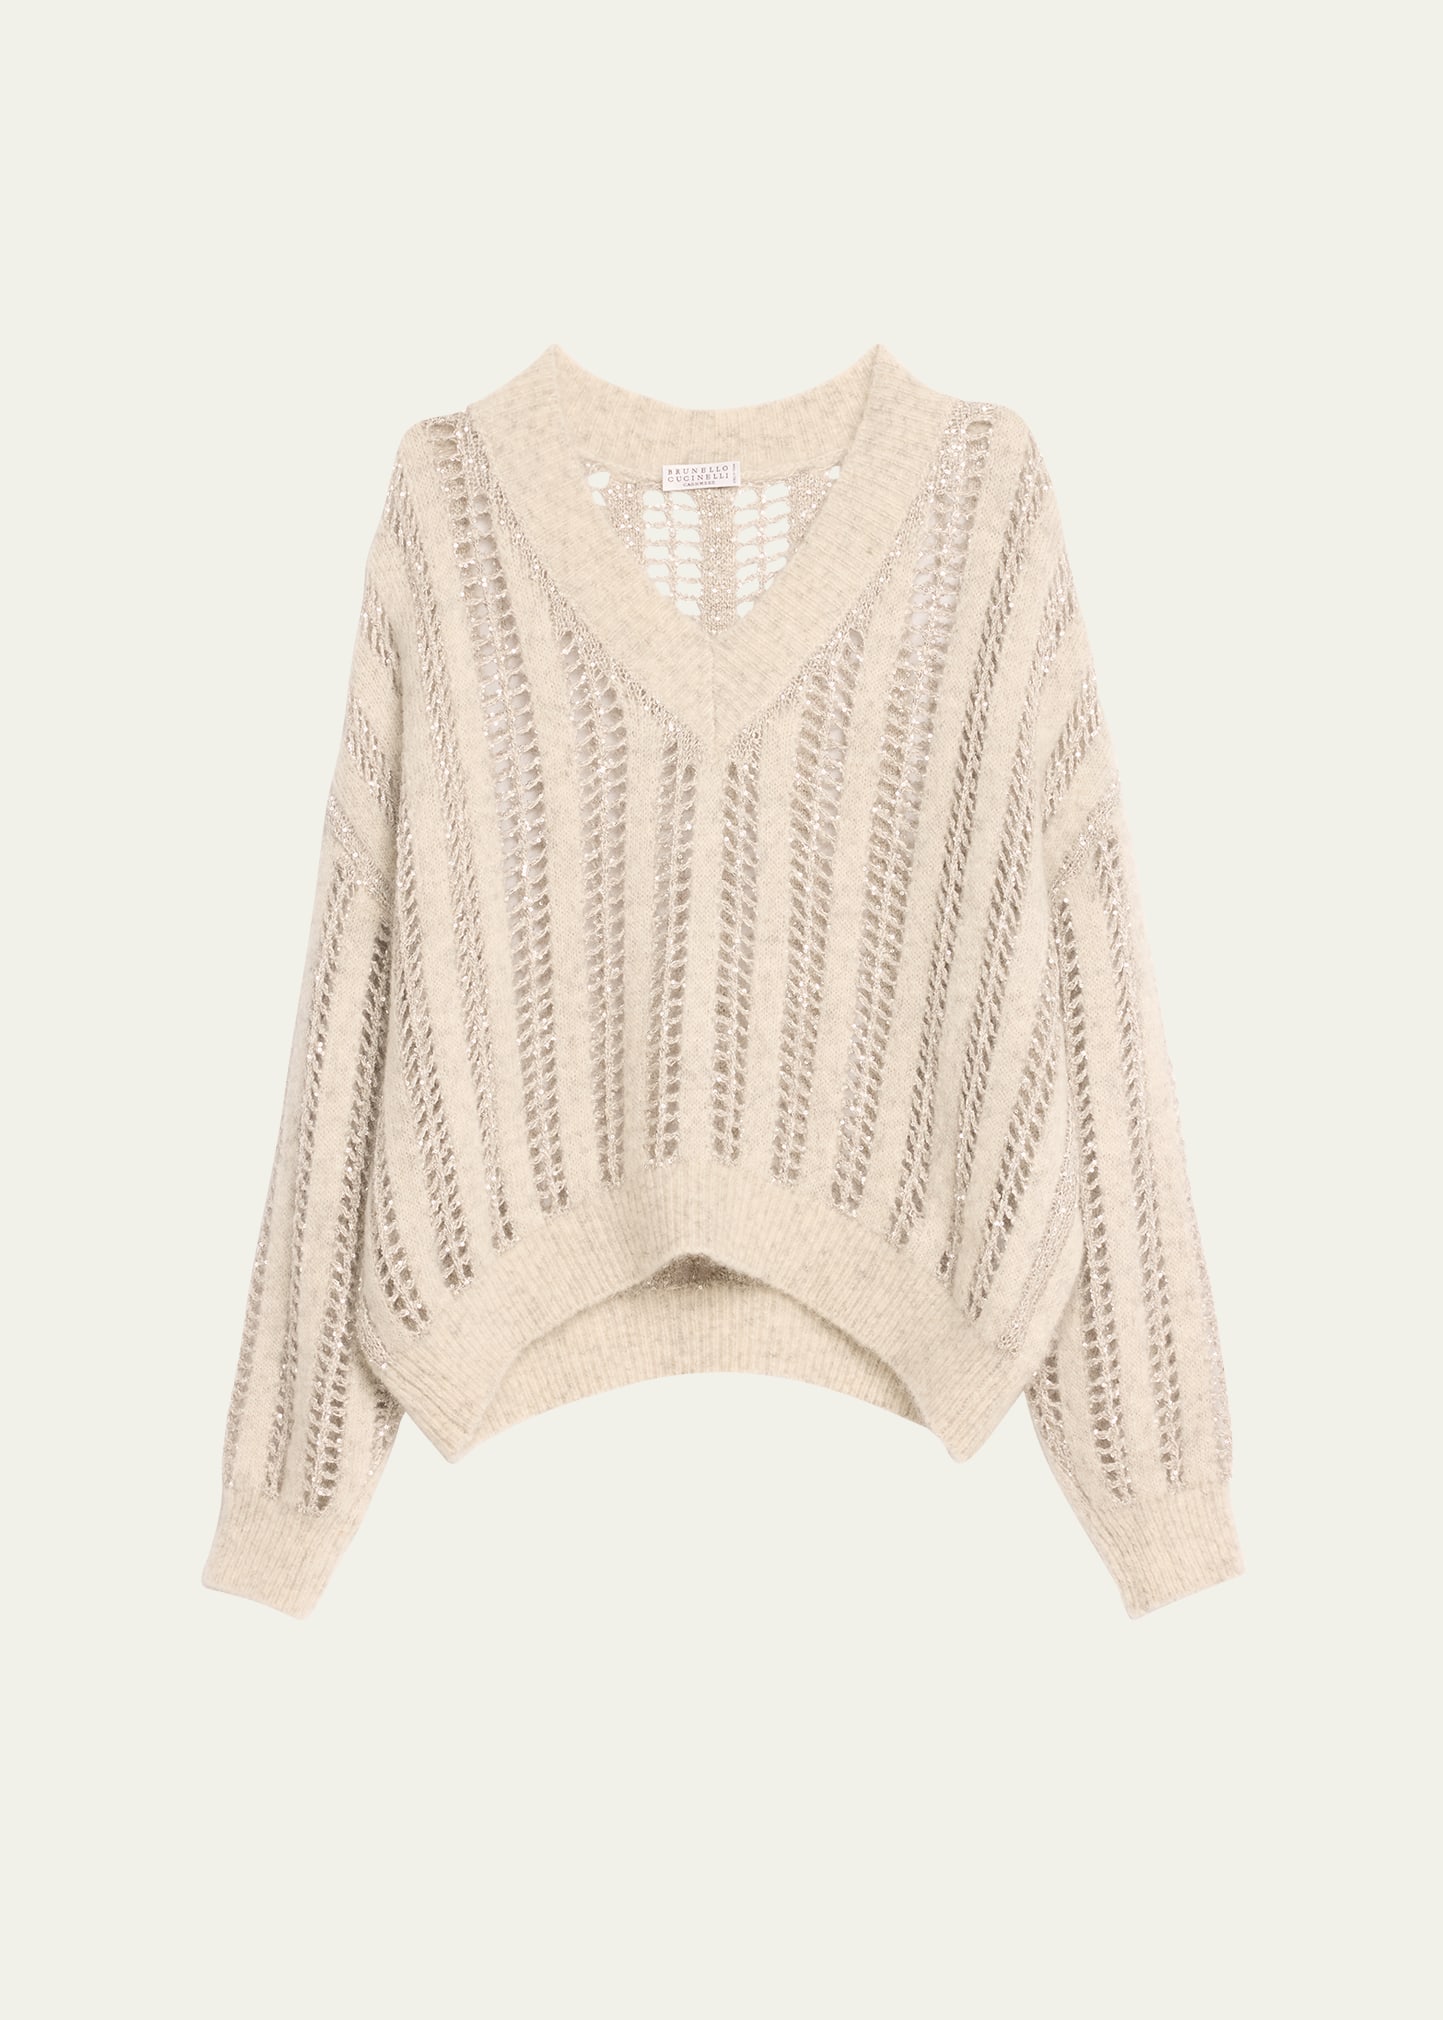 Brunello Cucinelli Mohair Wool Lattice Knit Sweater With Paillette Detail In Neutral